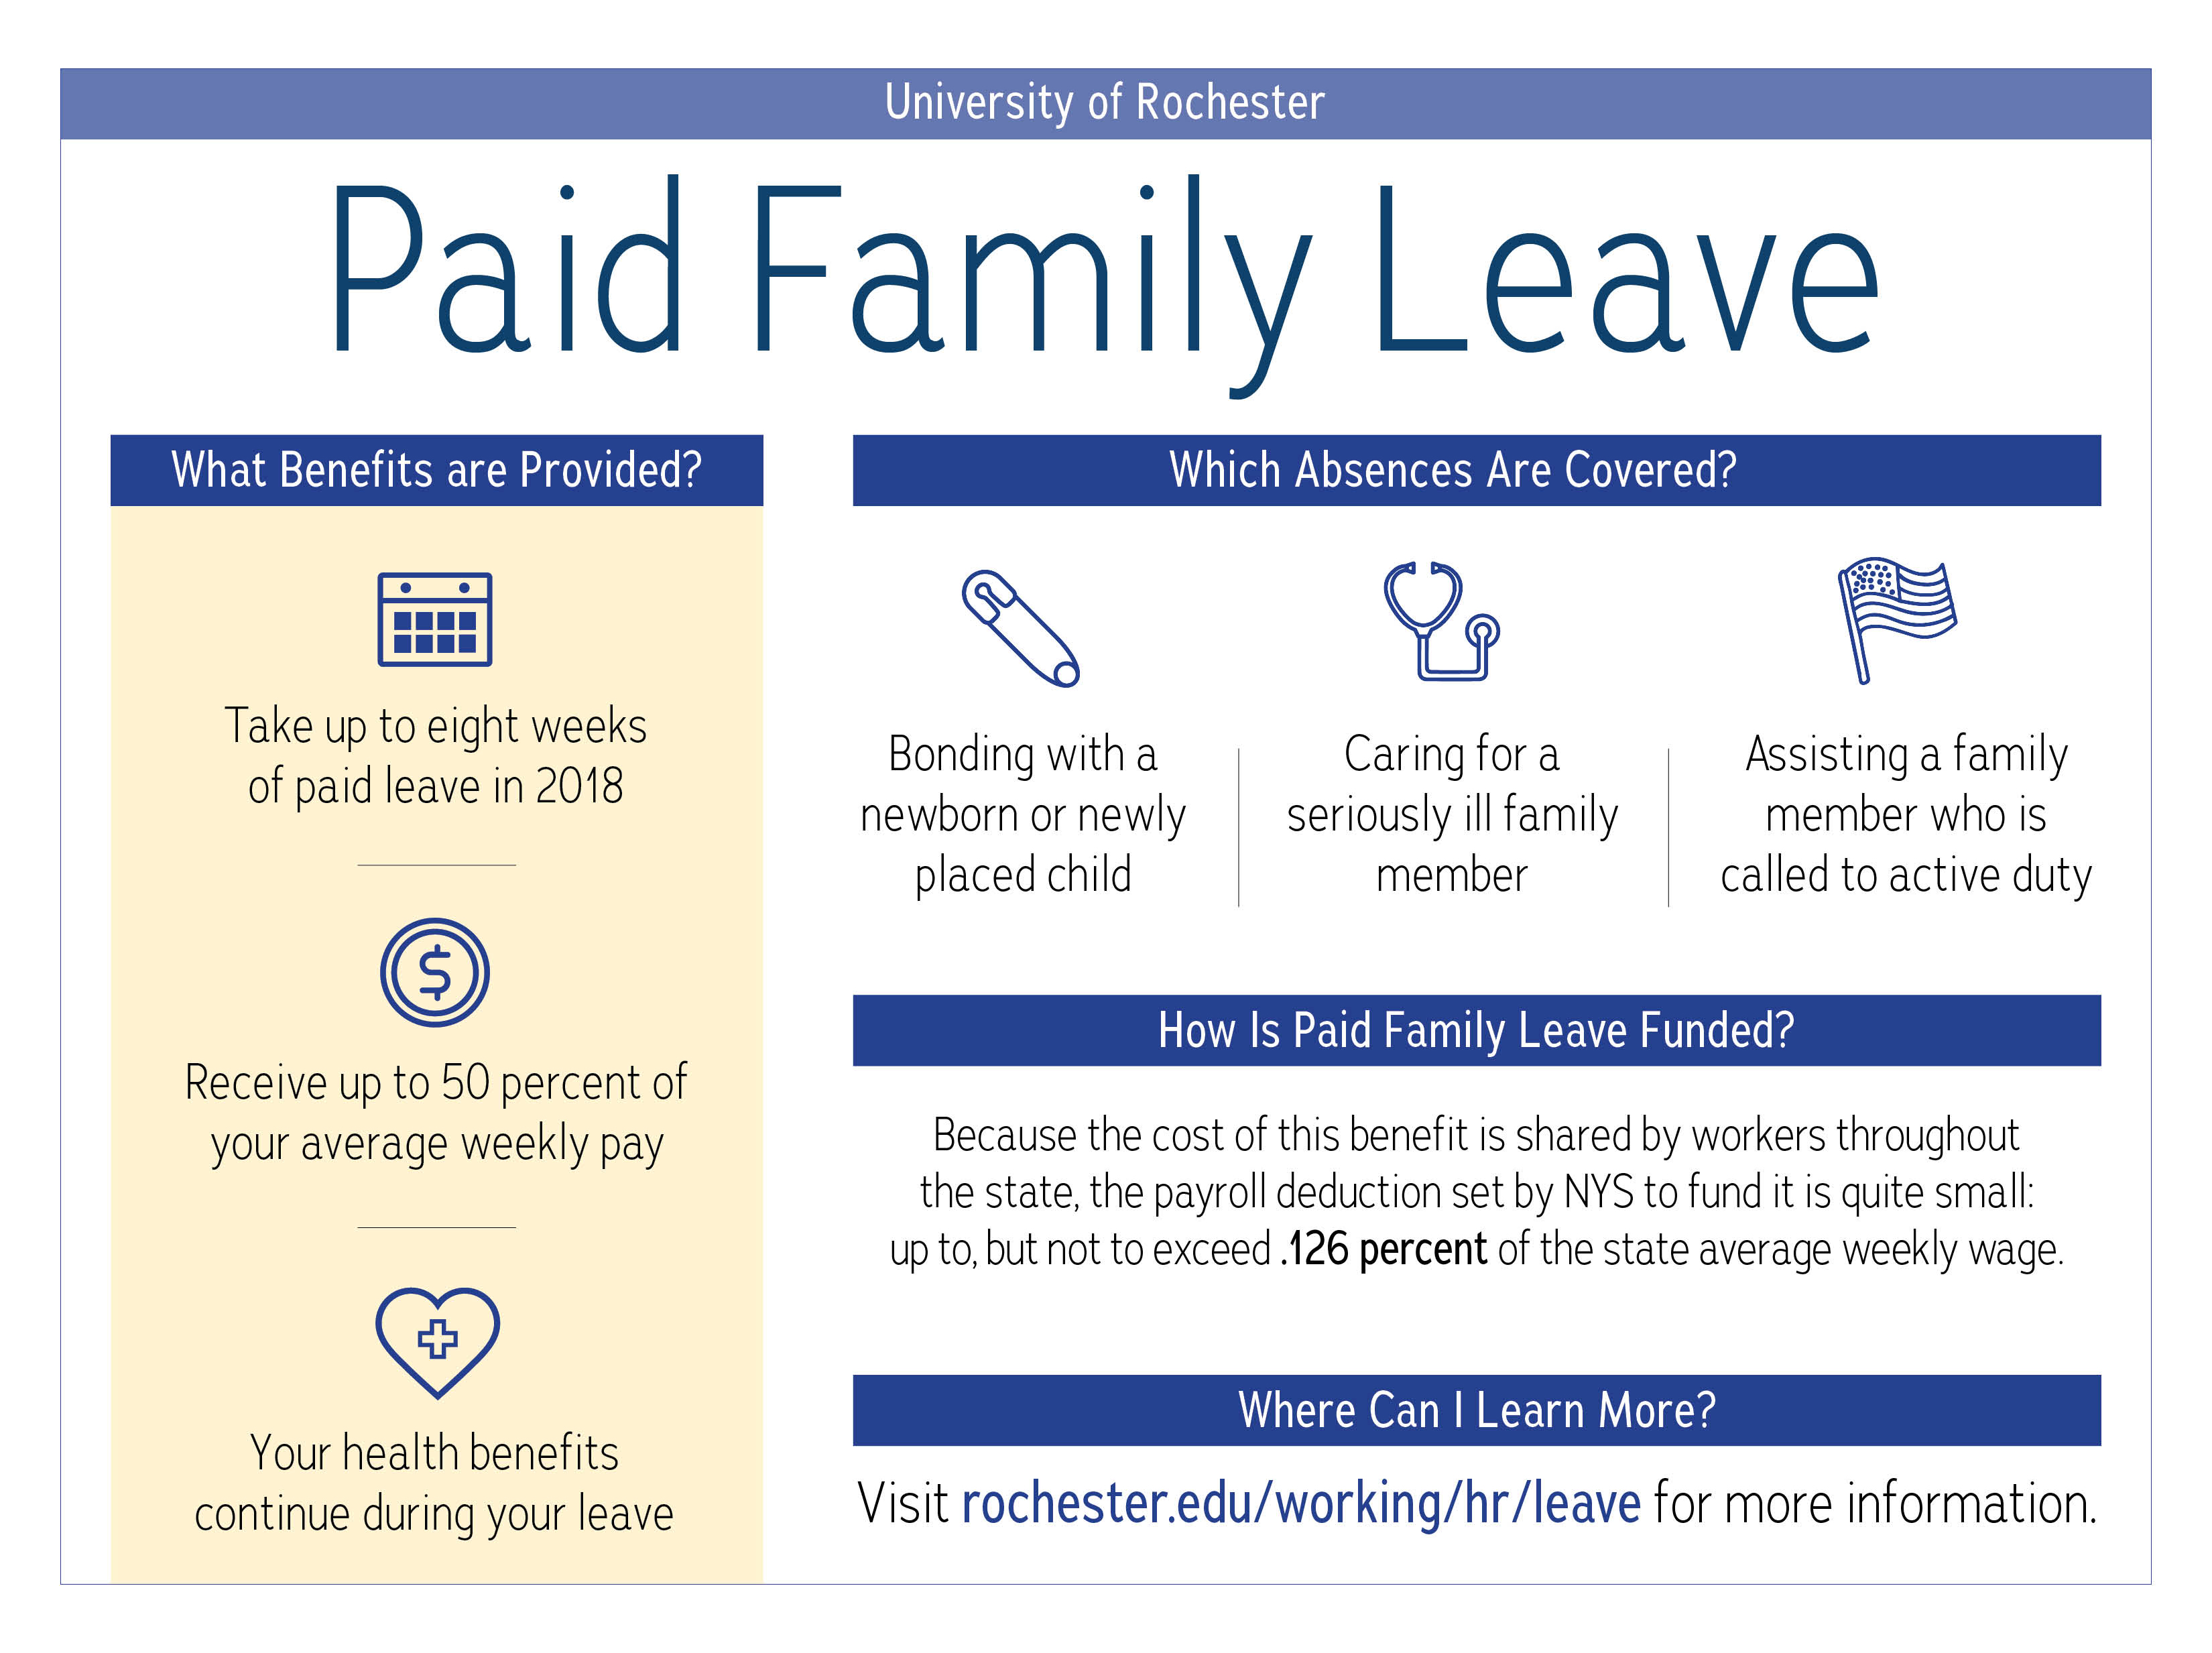 New York State Paid Family Leave Act goes into effect Jan. 1 NewsCenter